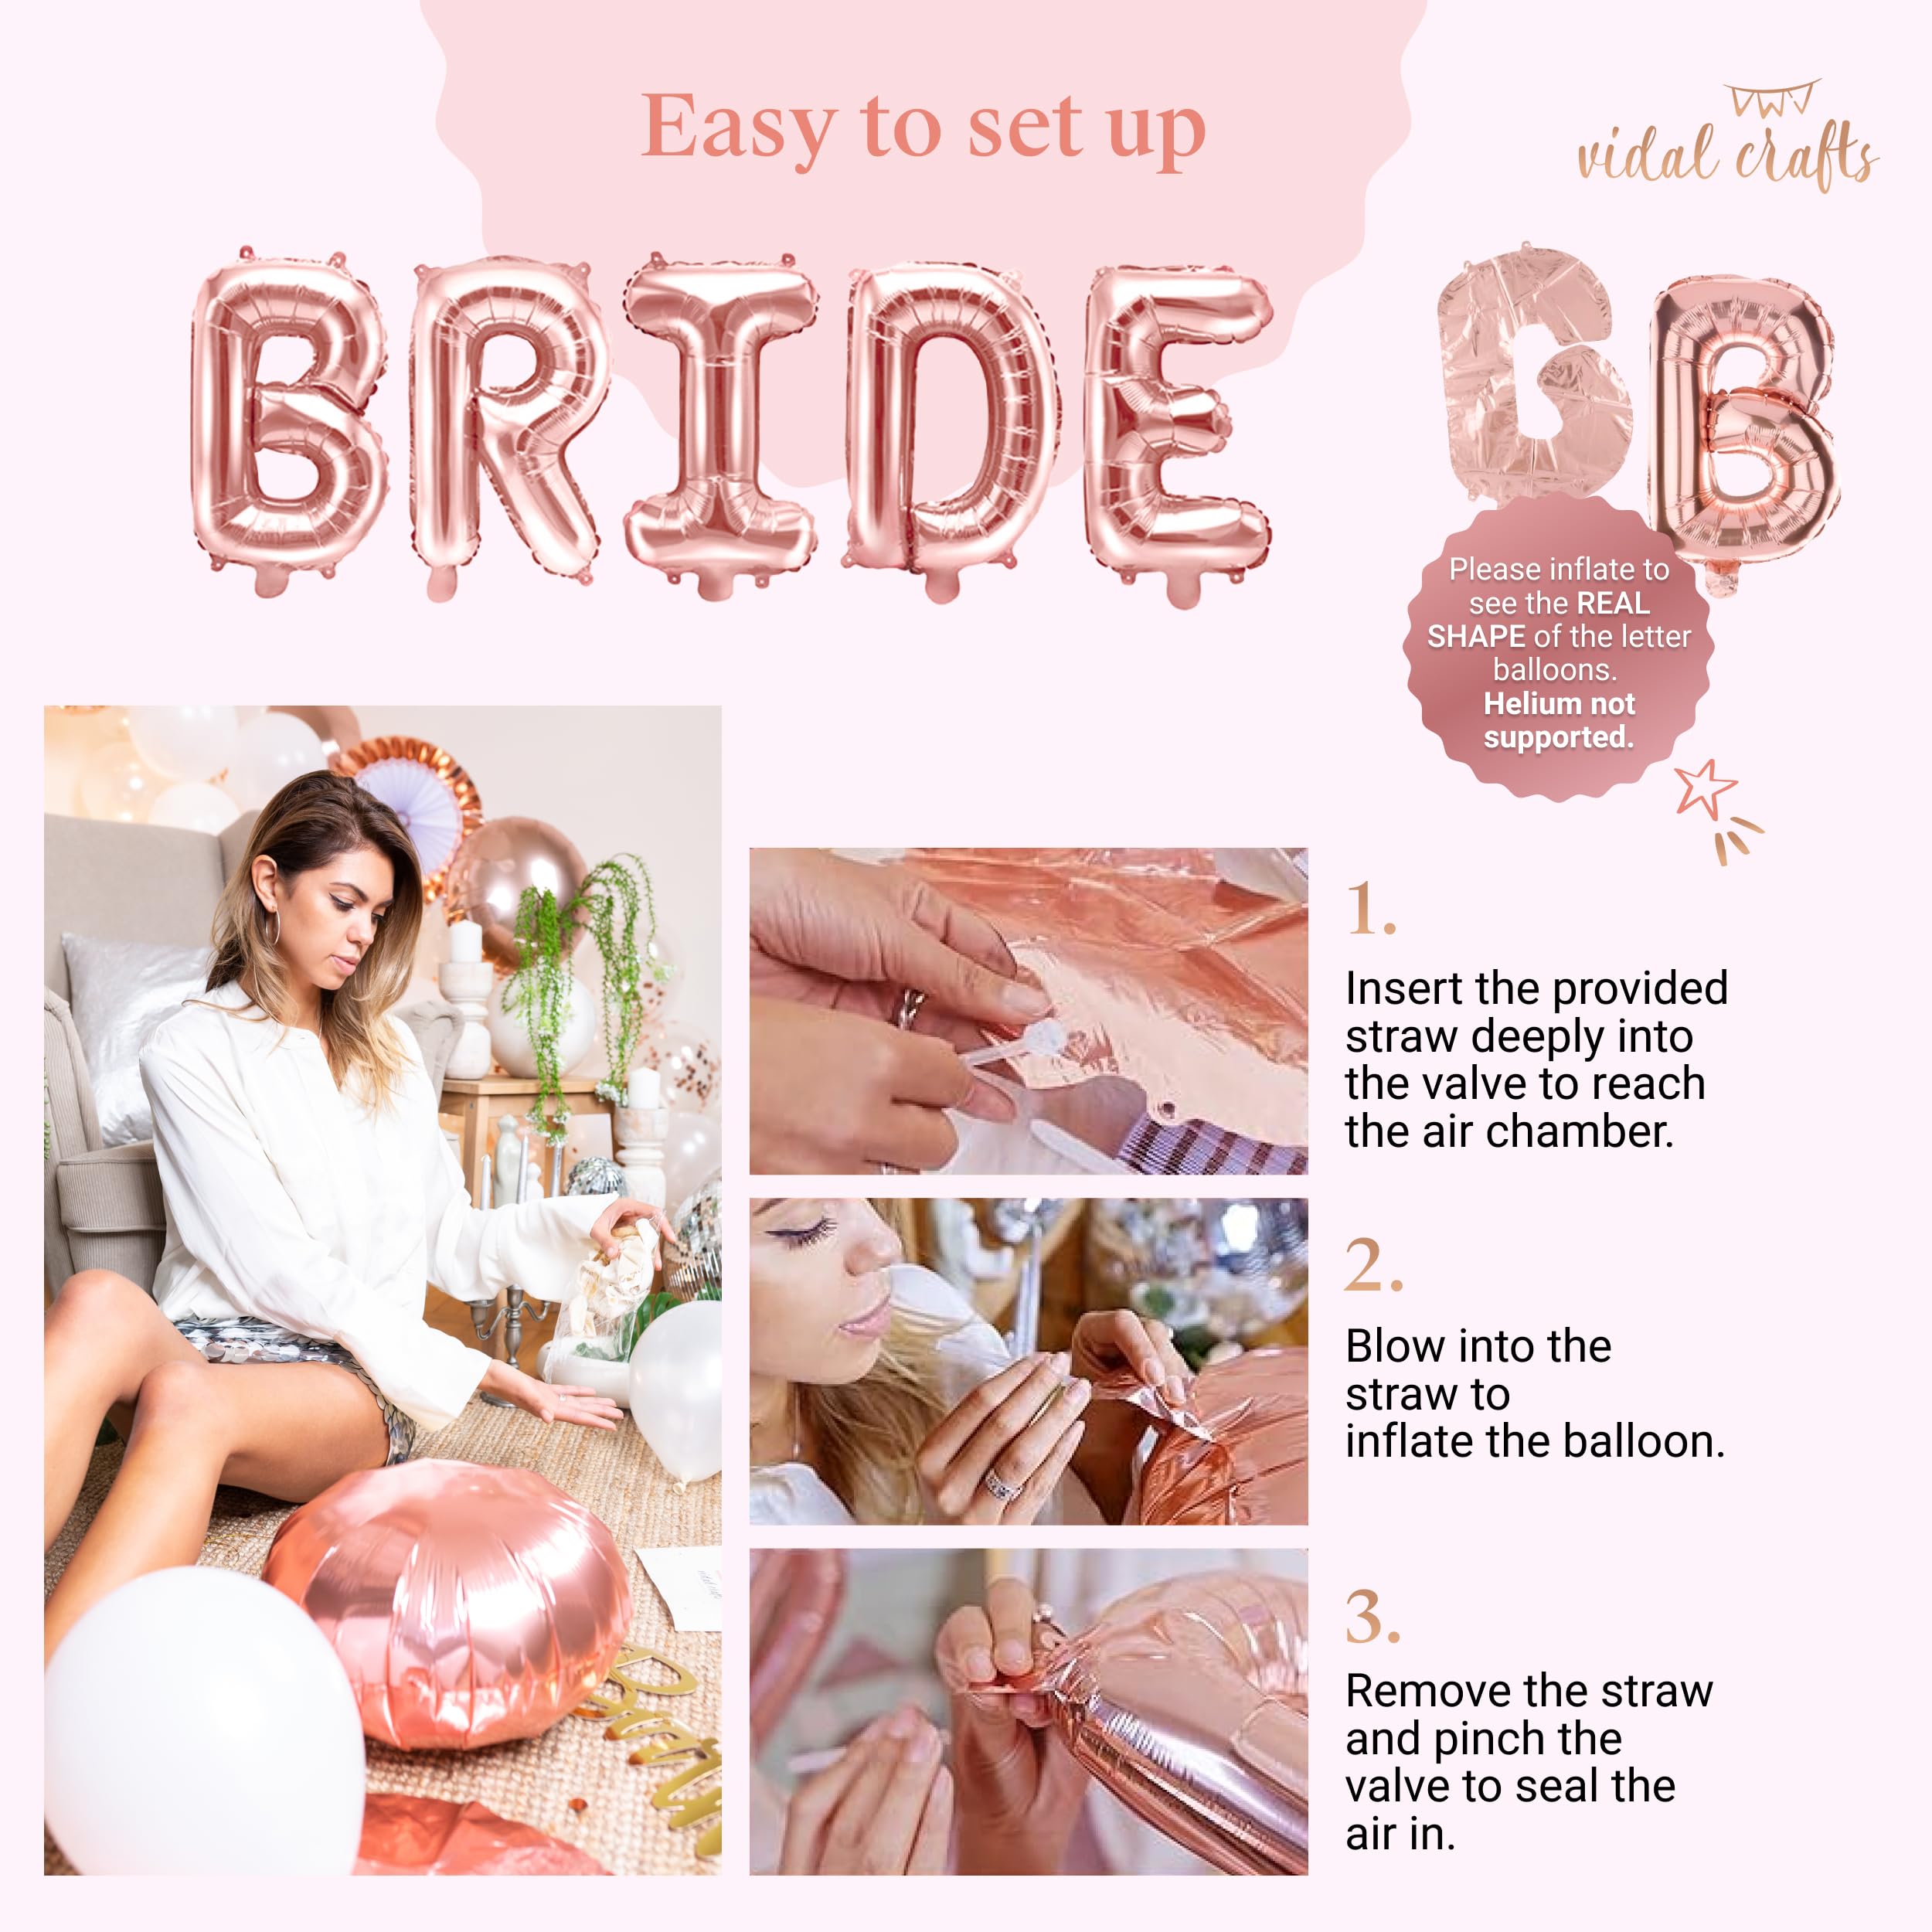 VIDAL CRAFTS Rose Gold Bridal Shower Decorations- Bachelorette Party Decorations Kit, Bride to Be Decorations - Including BRIDE Balloons, Banners, Paper Fans, Confetti Balloons